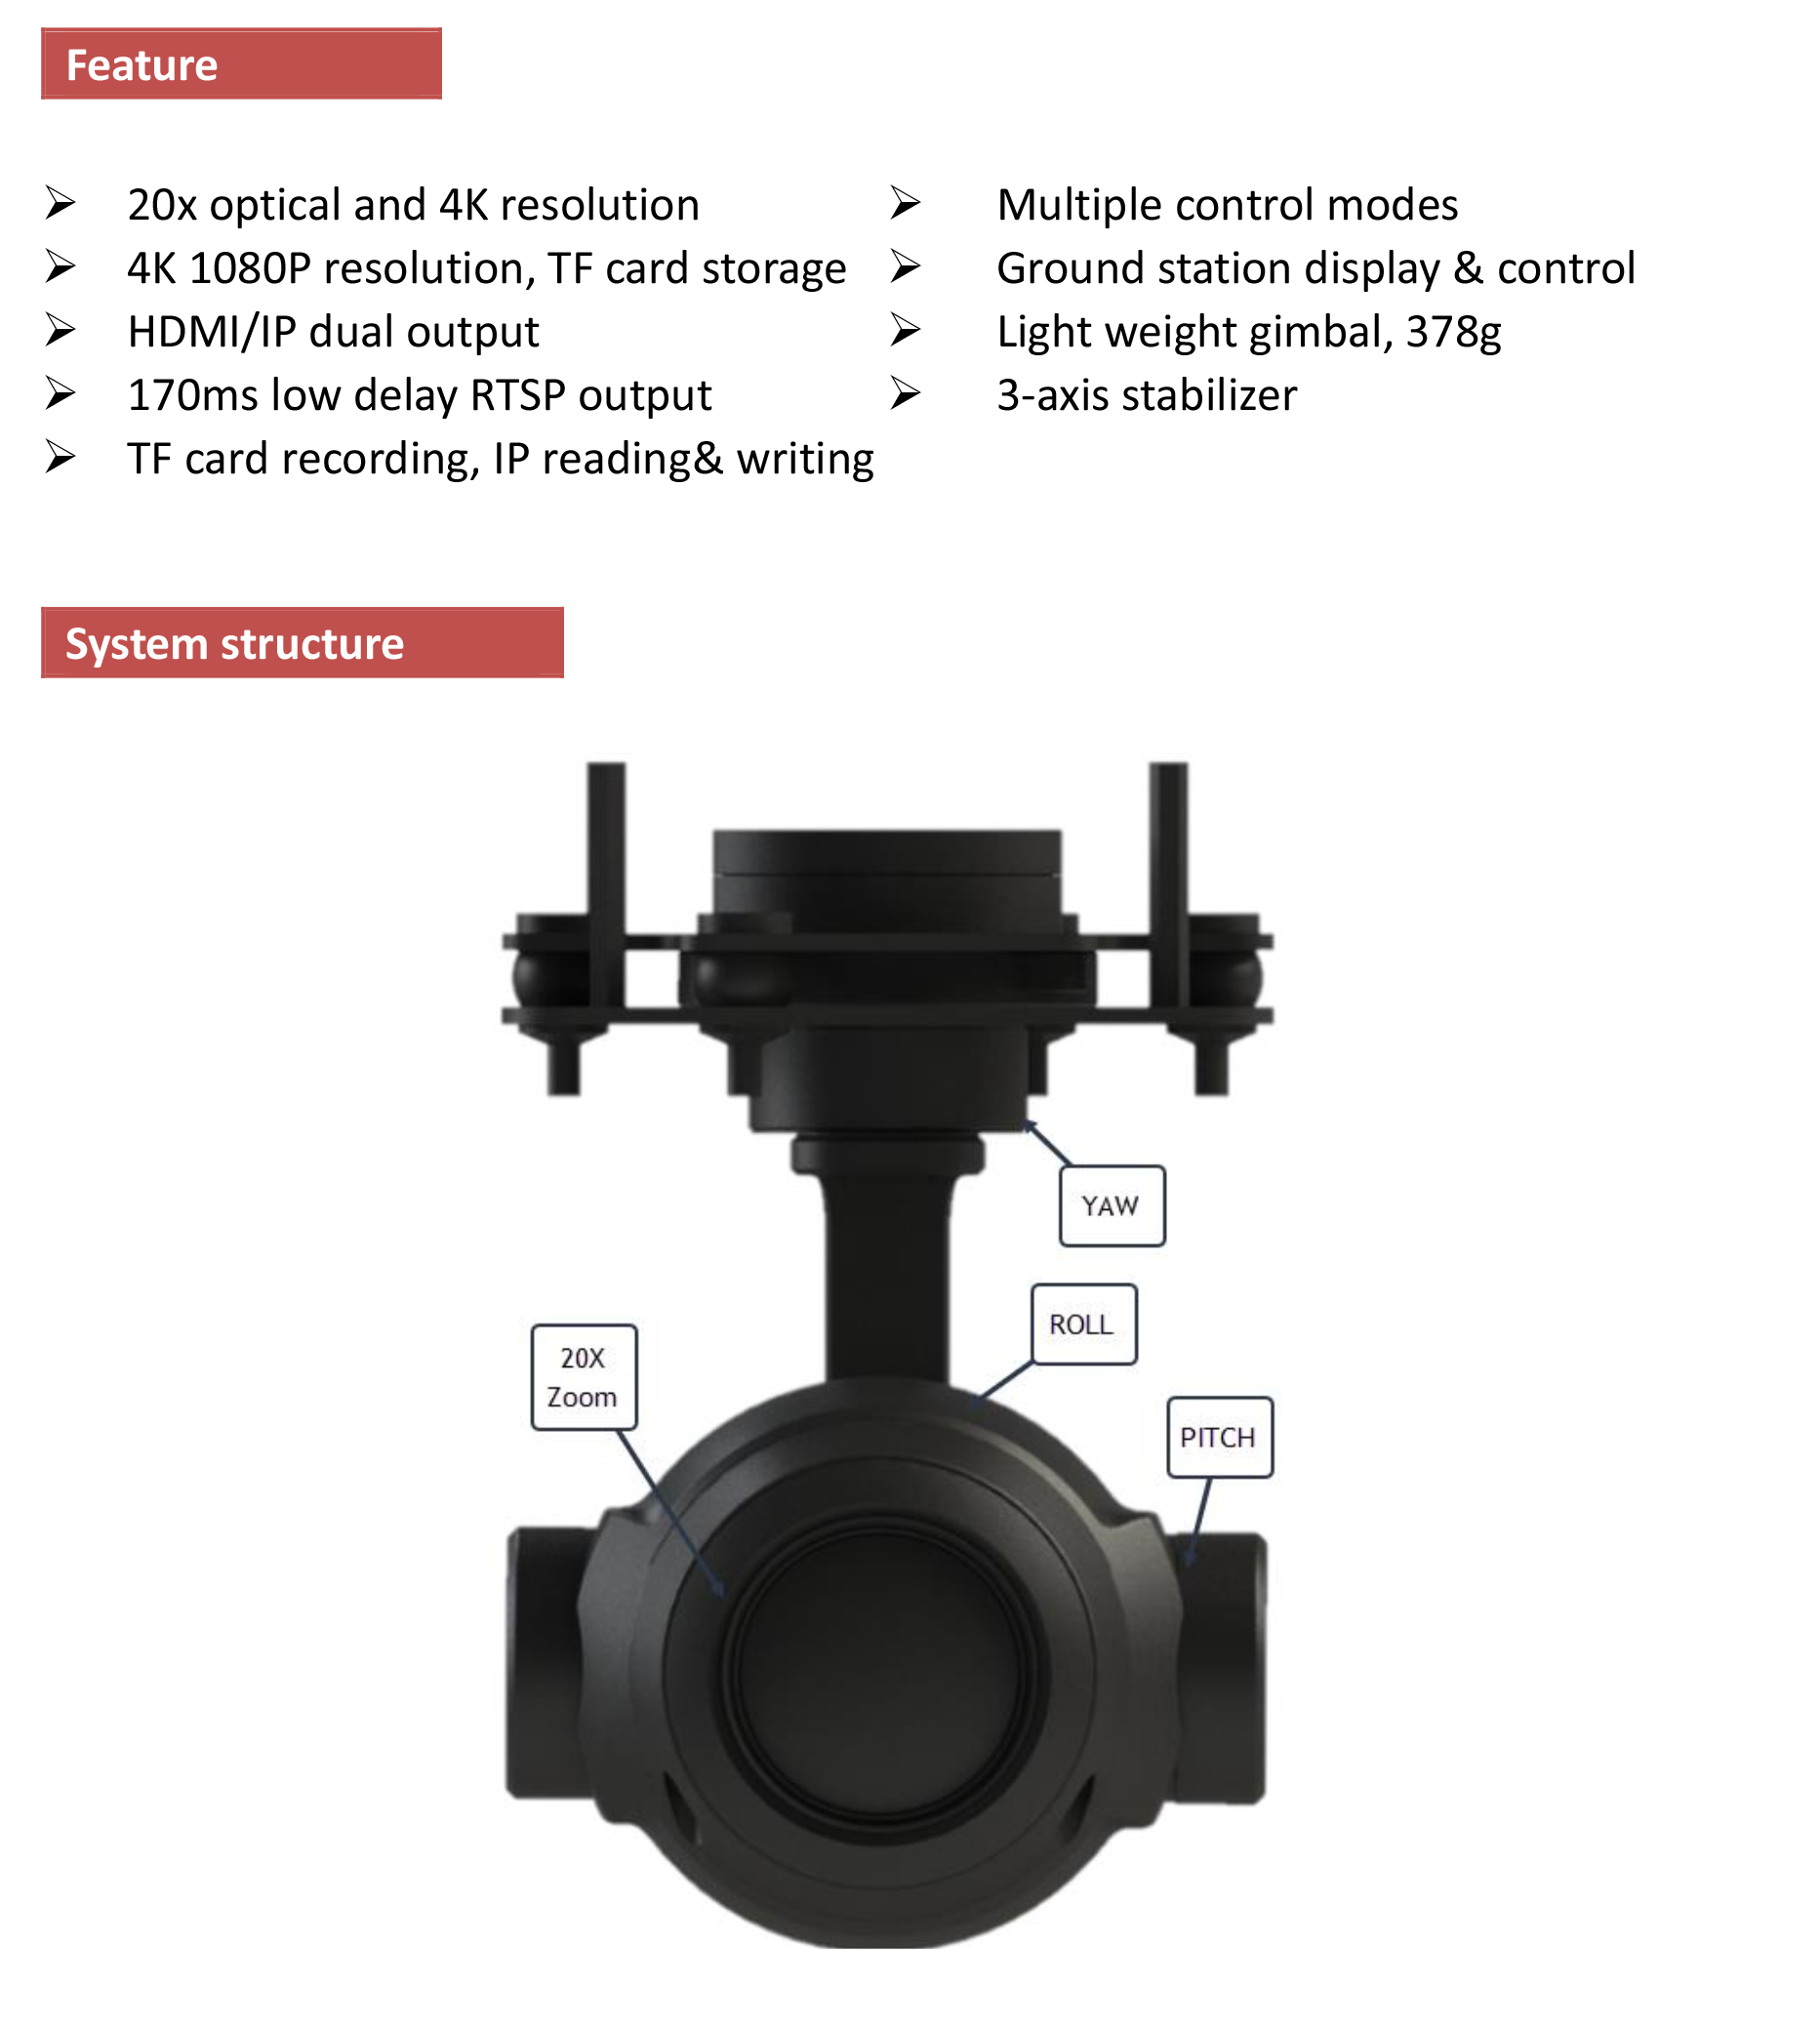 TOPOTEK KHP20S4K Gimbal, Stabilized camera with 3-axis gimbal and 20x zoom lens for precise movement control.